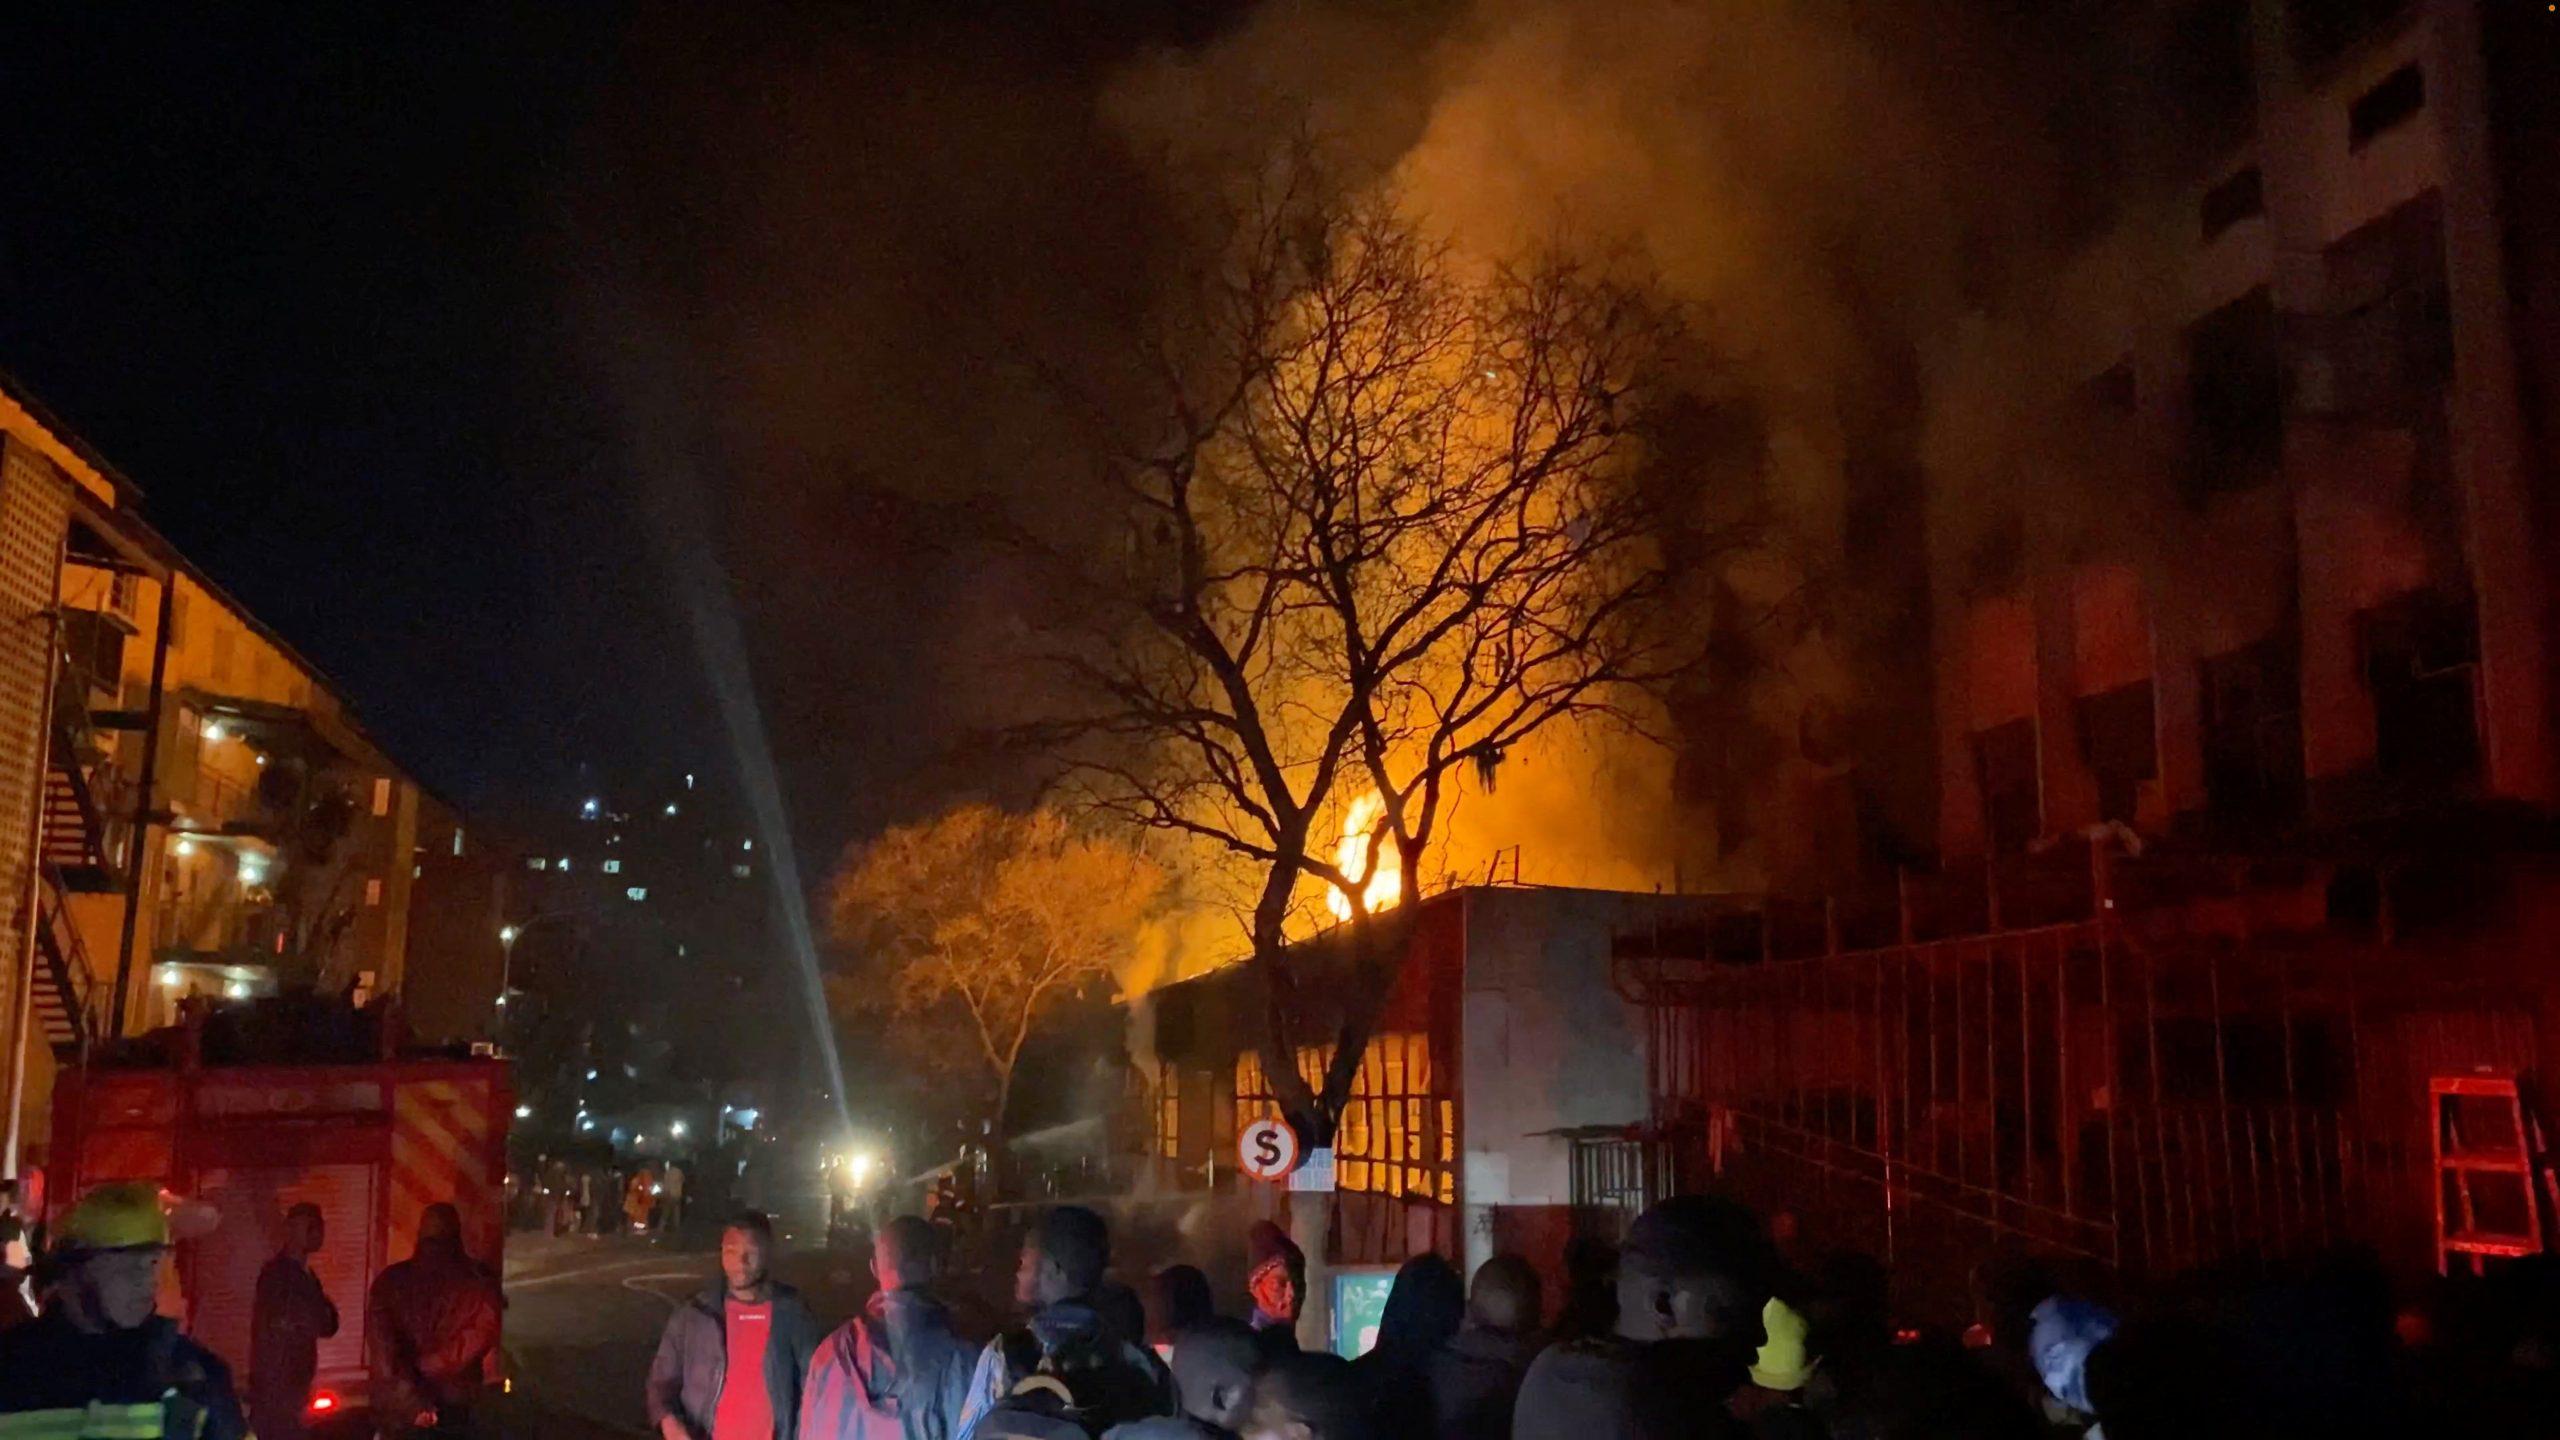 Social media footage shows deadly fire in Johannesburg